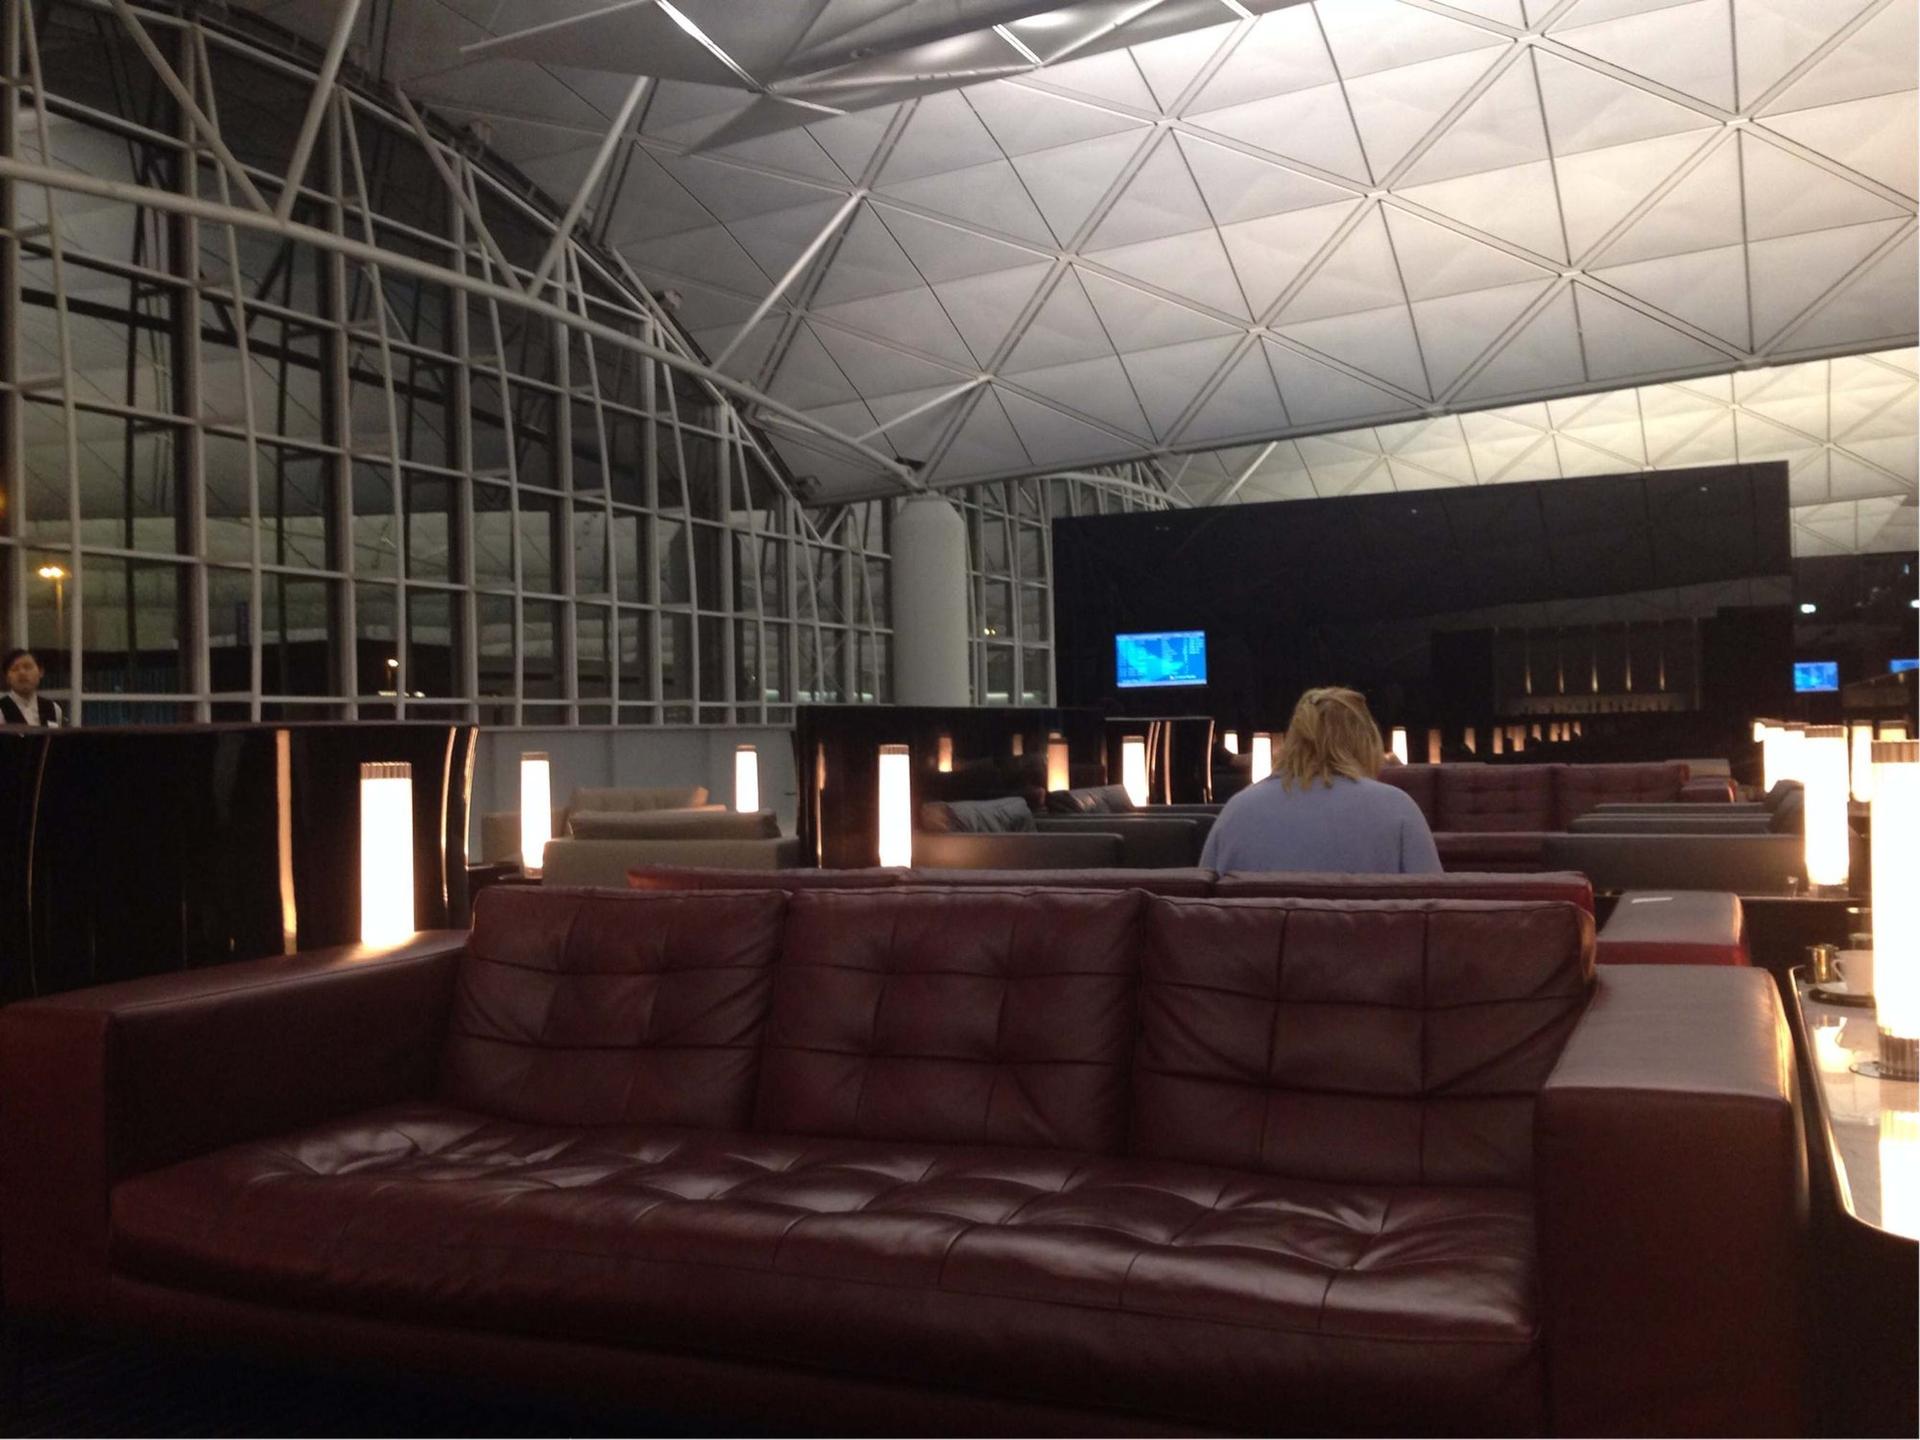 Cathay Pacific The Wing First Class Lounge image 25 of 89